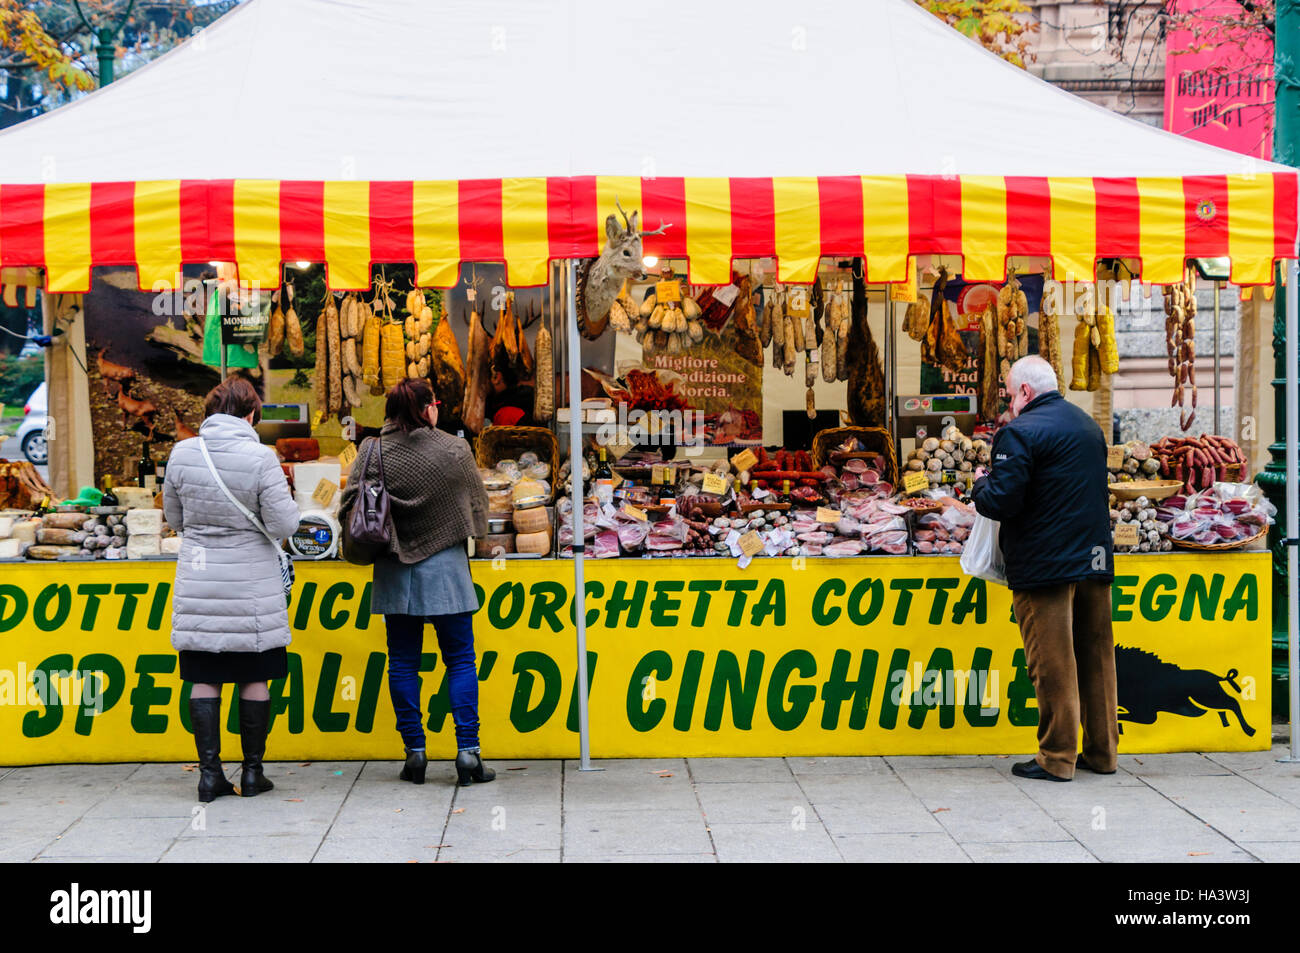 Cheeses, hams and salamis for sale at an Italian market stall in Bergamo, Italy Stock Photo